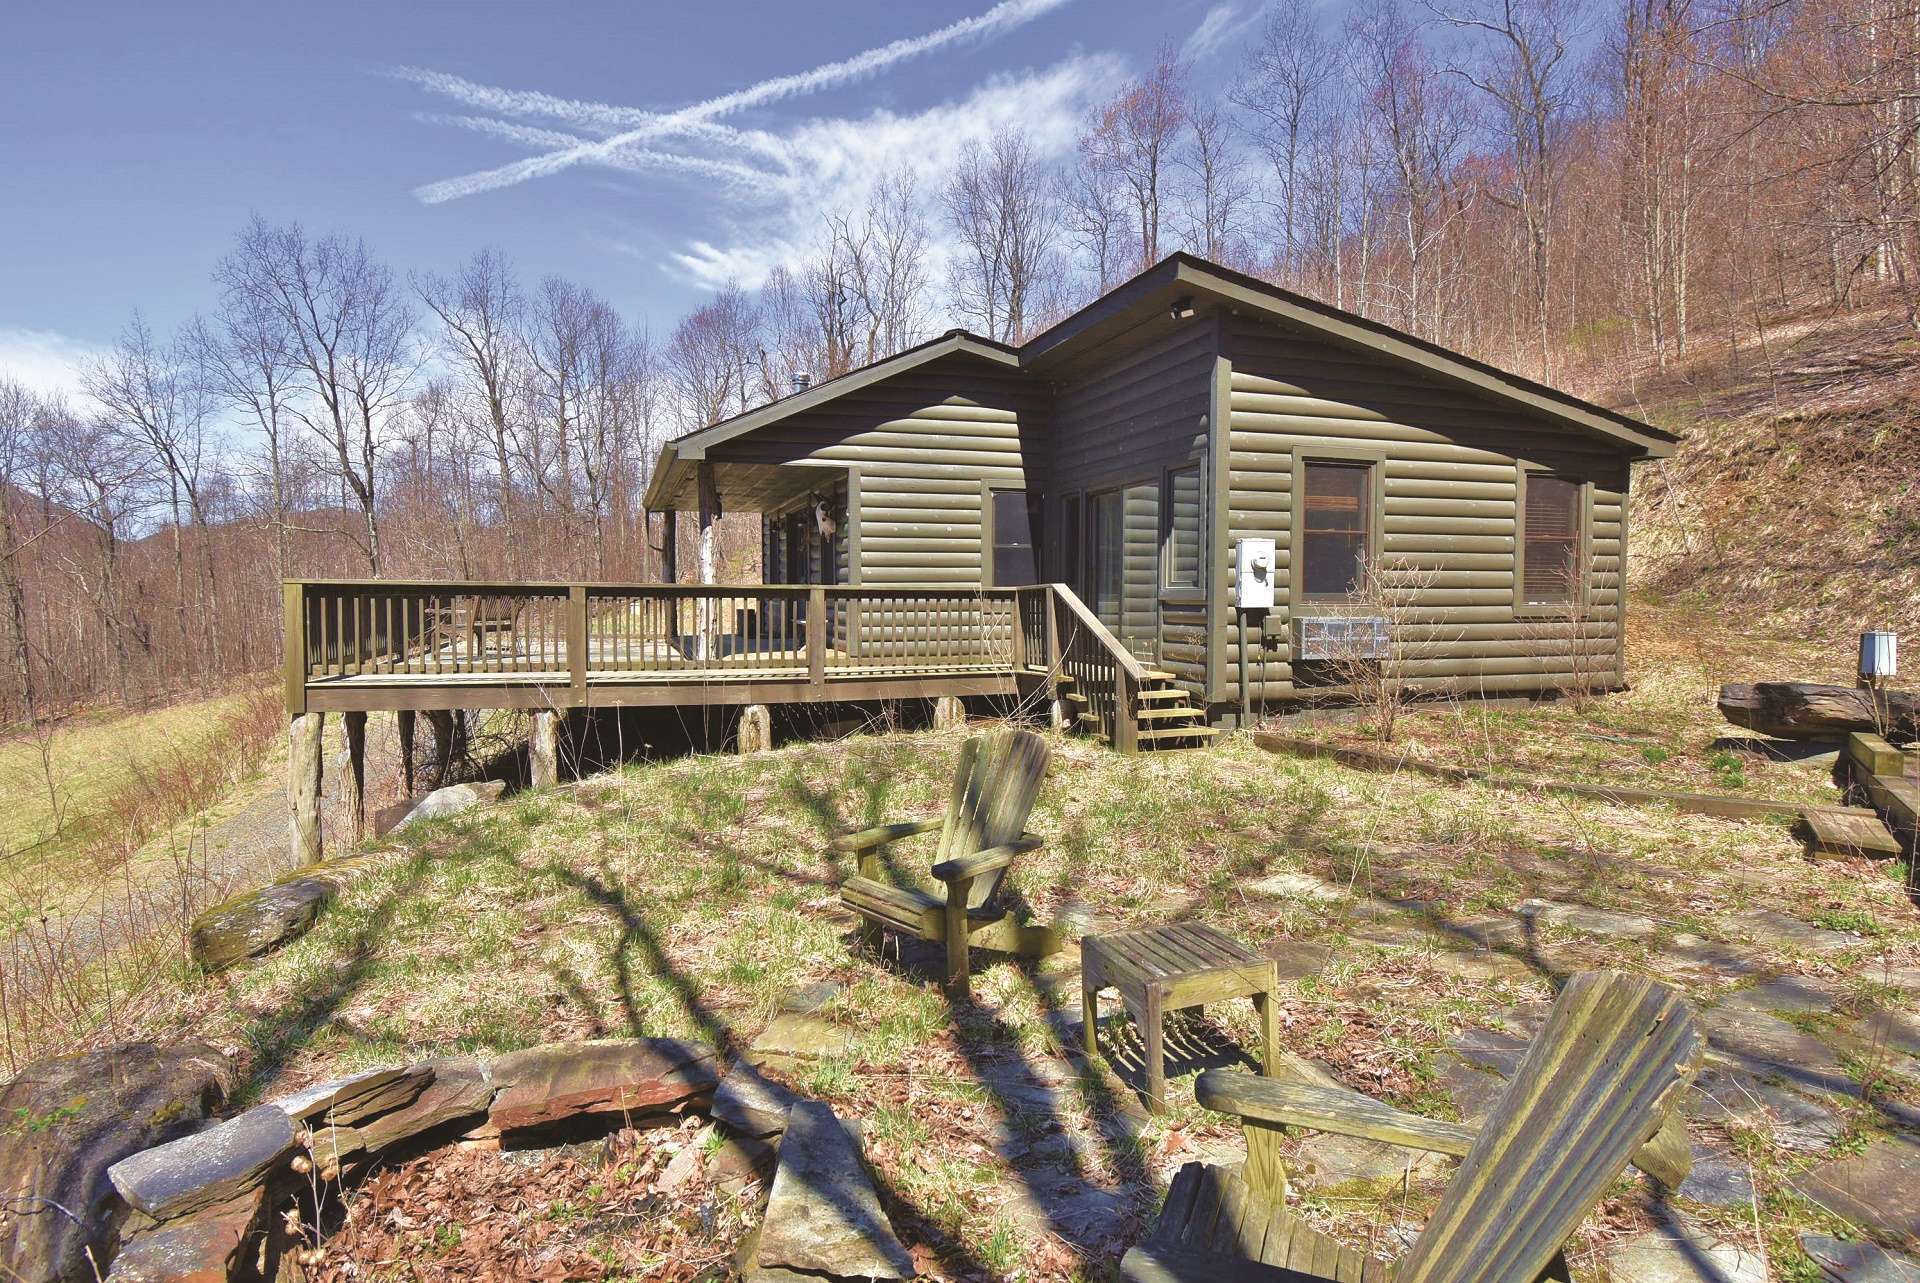 Offered at $900,000, this private 110+ acre estate features a 2-bedroom, 1-bath cabin, two barns, pastures, woodlands, creeks, ponds, multiple additional building sites, views, abundant wildlife, and a Southern Ashe County location just minutes to West Jefferson, Boone, and other High Country destinations. Perfect for your NC mountain retreat, full time residence, farm for your horses or other livestock, and a great space for your own vineyard. Come take a look! C132